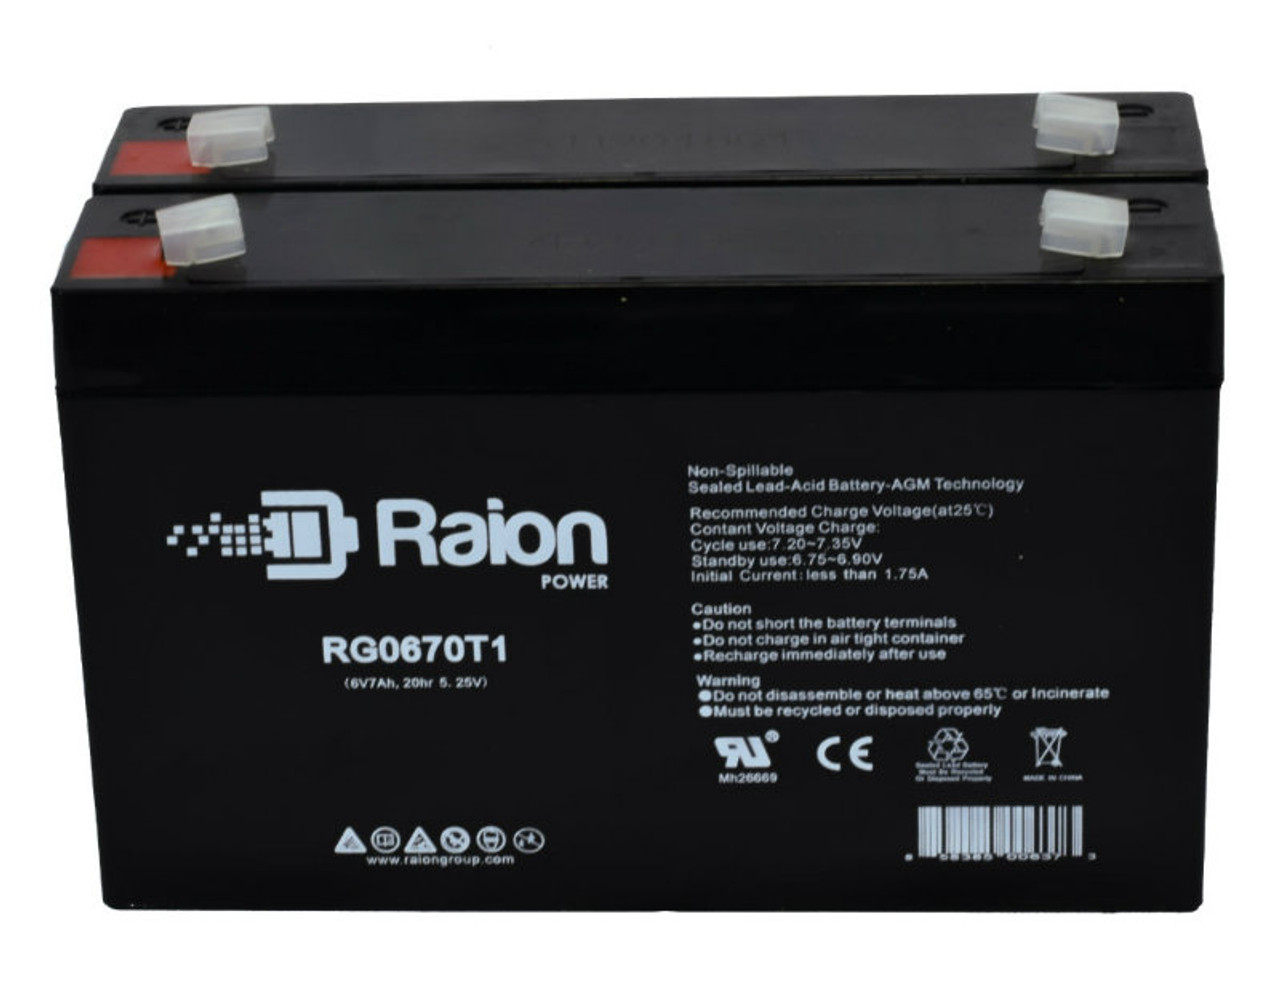 Raion Power RG0670T1 6V 7Ah Replacement Emergency Light Battery for National Power Corporation GS016Q4 - 2 Pack